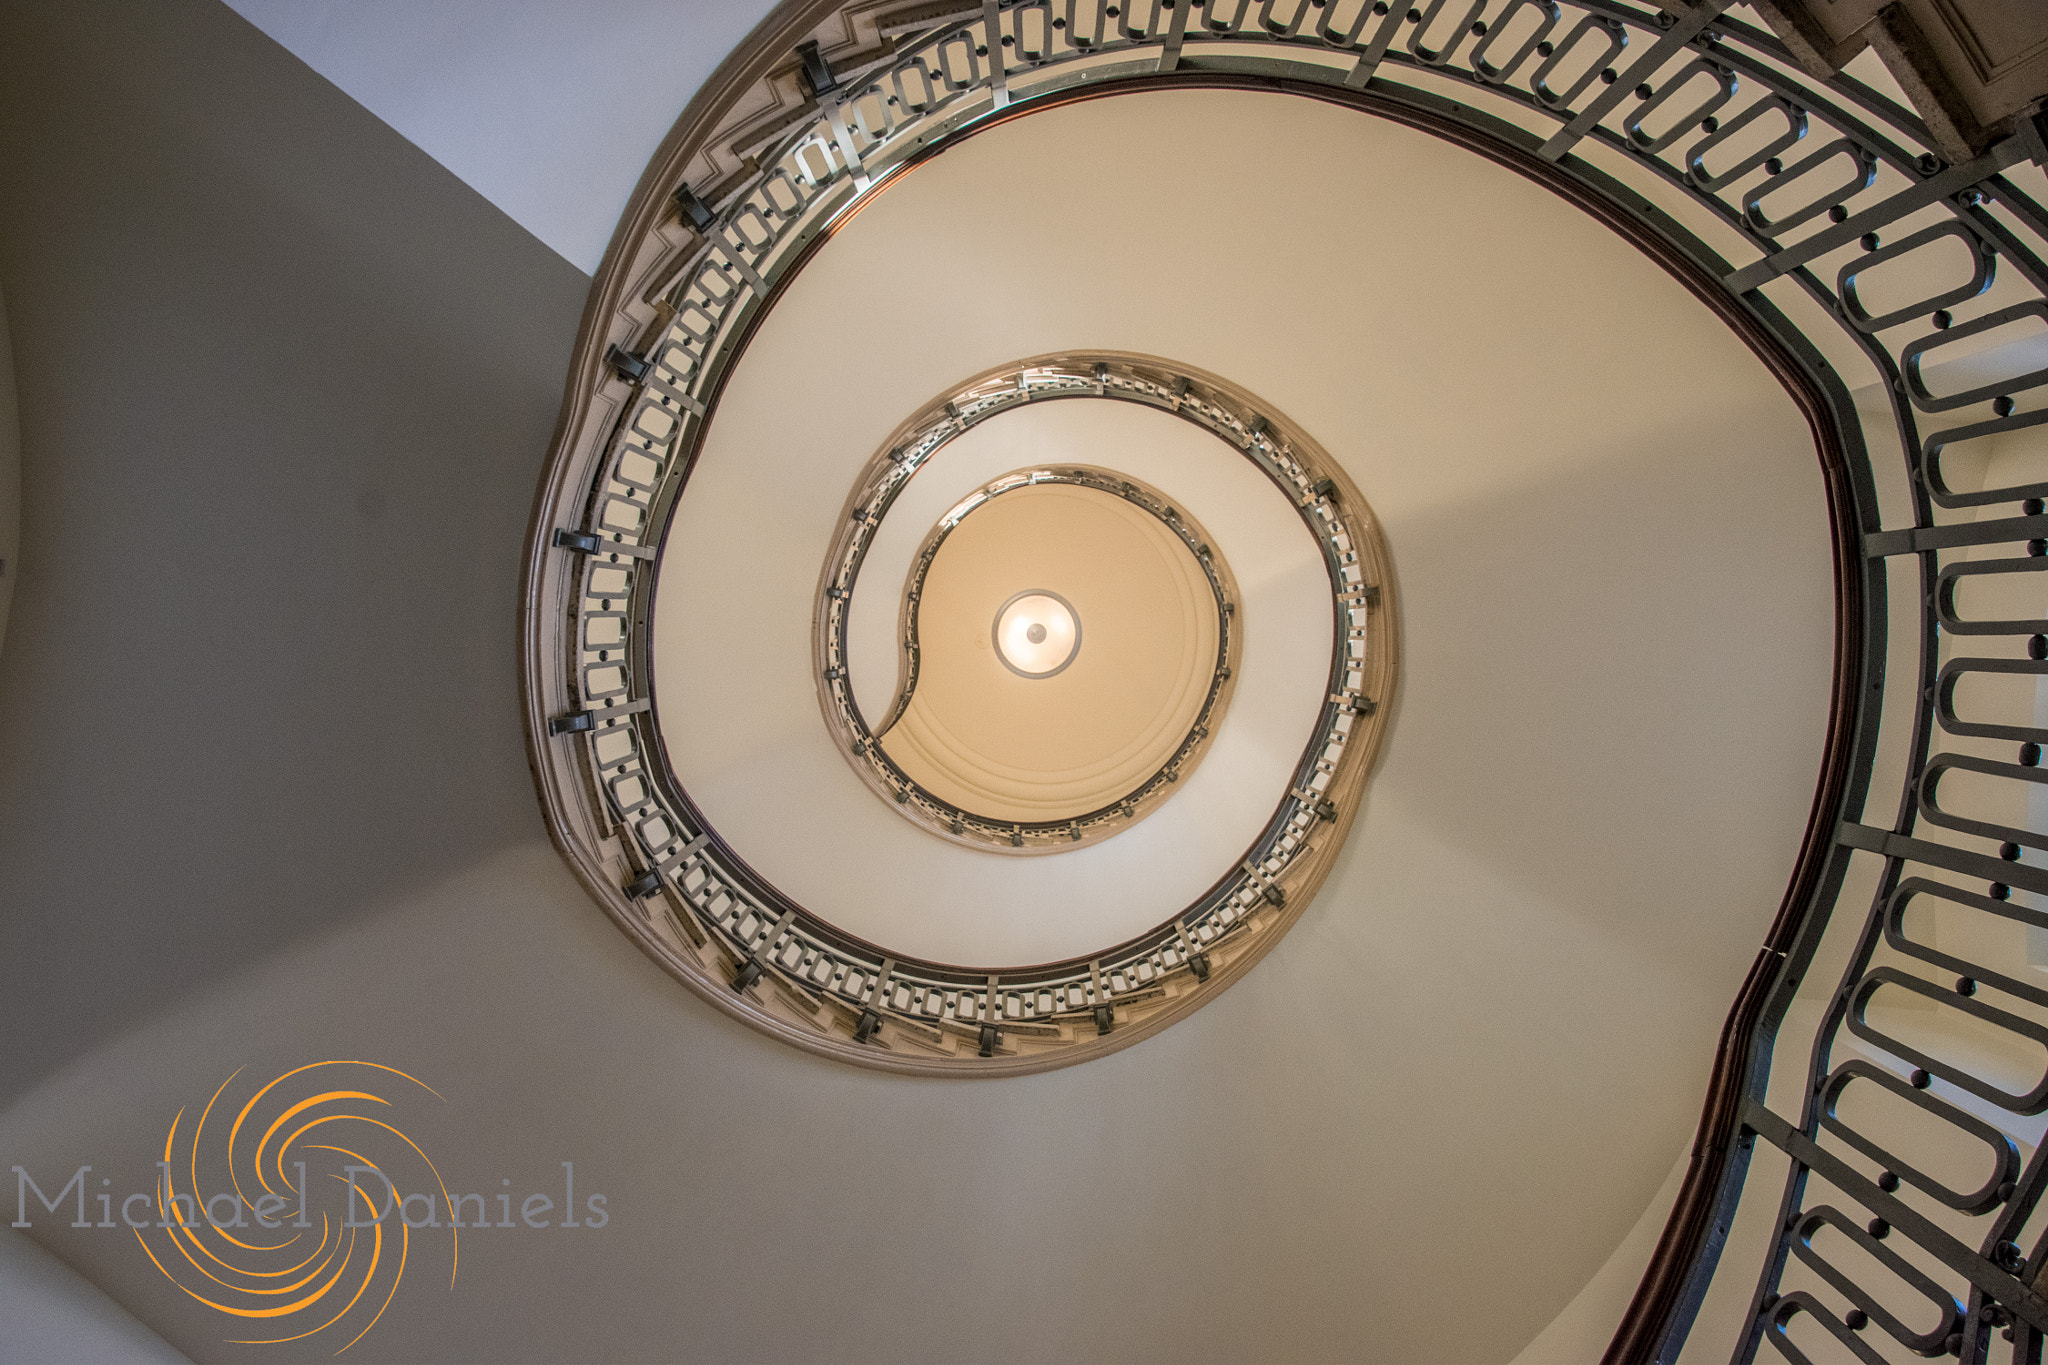 Nikon D7200 sample photo. View to the top- us naval academy spiral staircase. photography